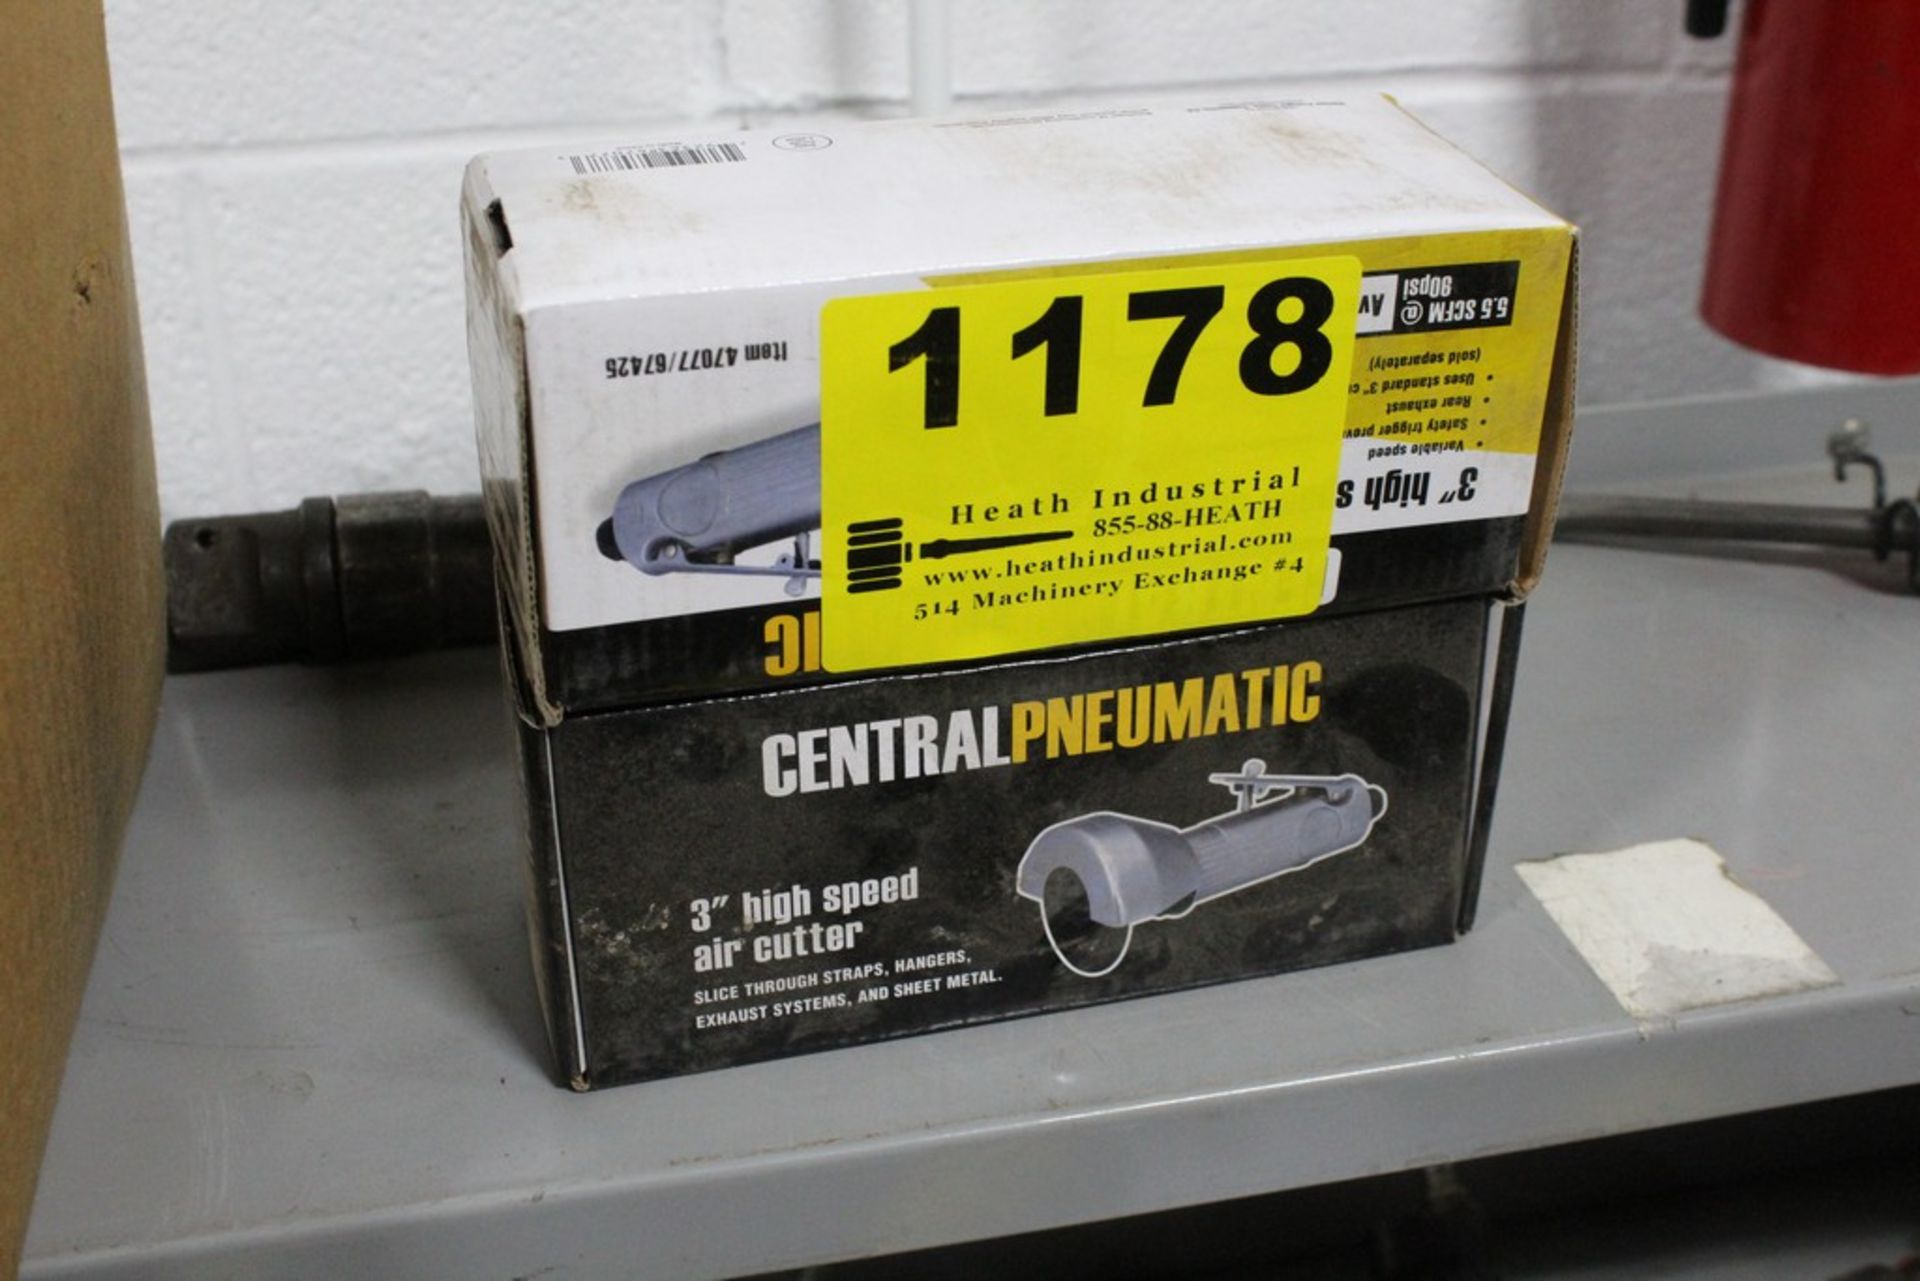 (2) CENTRAL PNEUMATIC ITEM NO. 47077 3" HIGH SPEED AIR CUTTERS